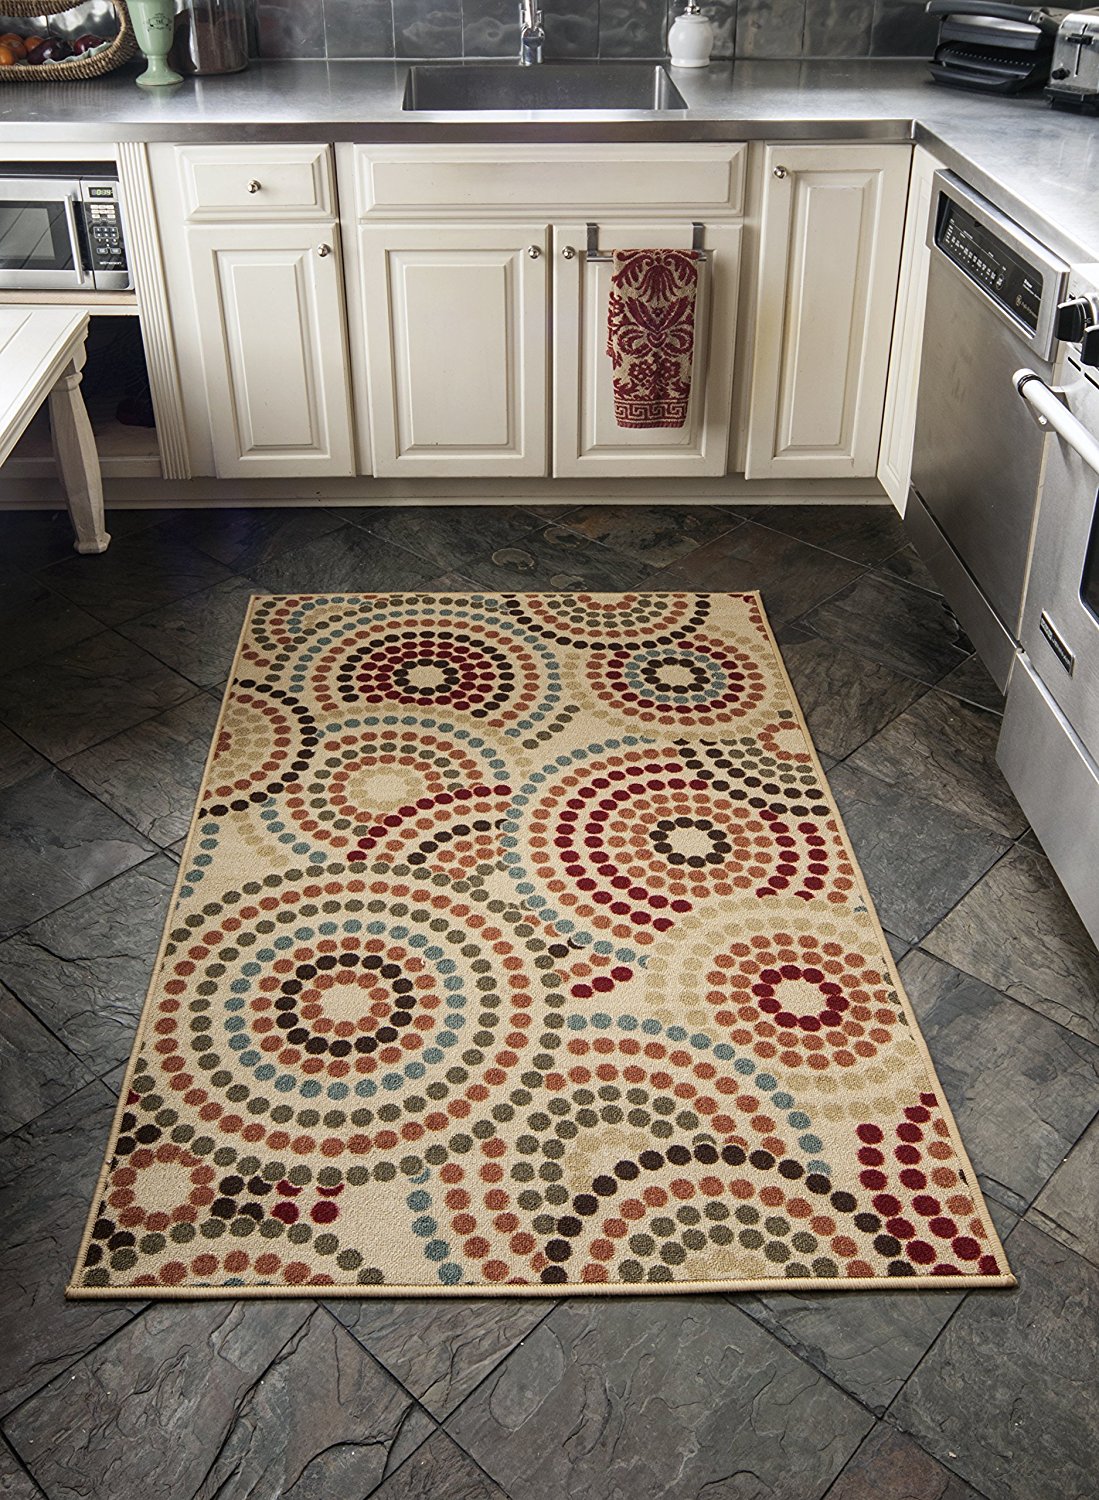 Rubber Backed Kitchen Rugs with Safety and Aesthetic Sides